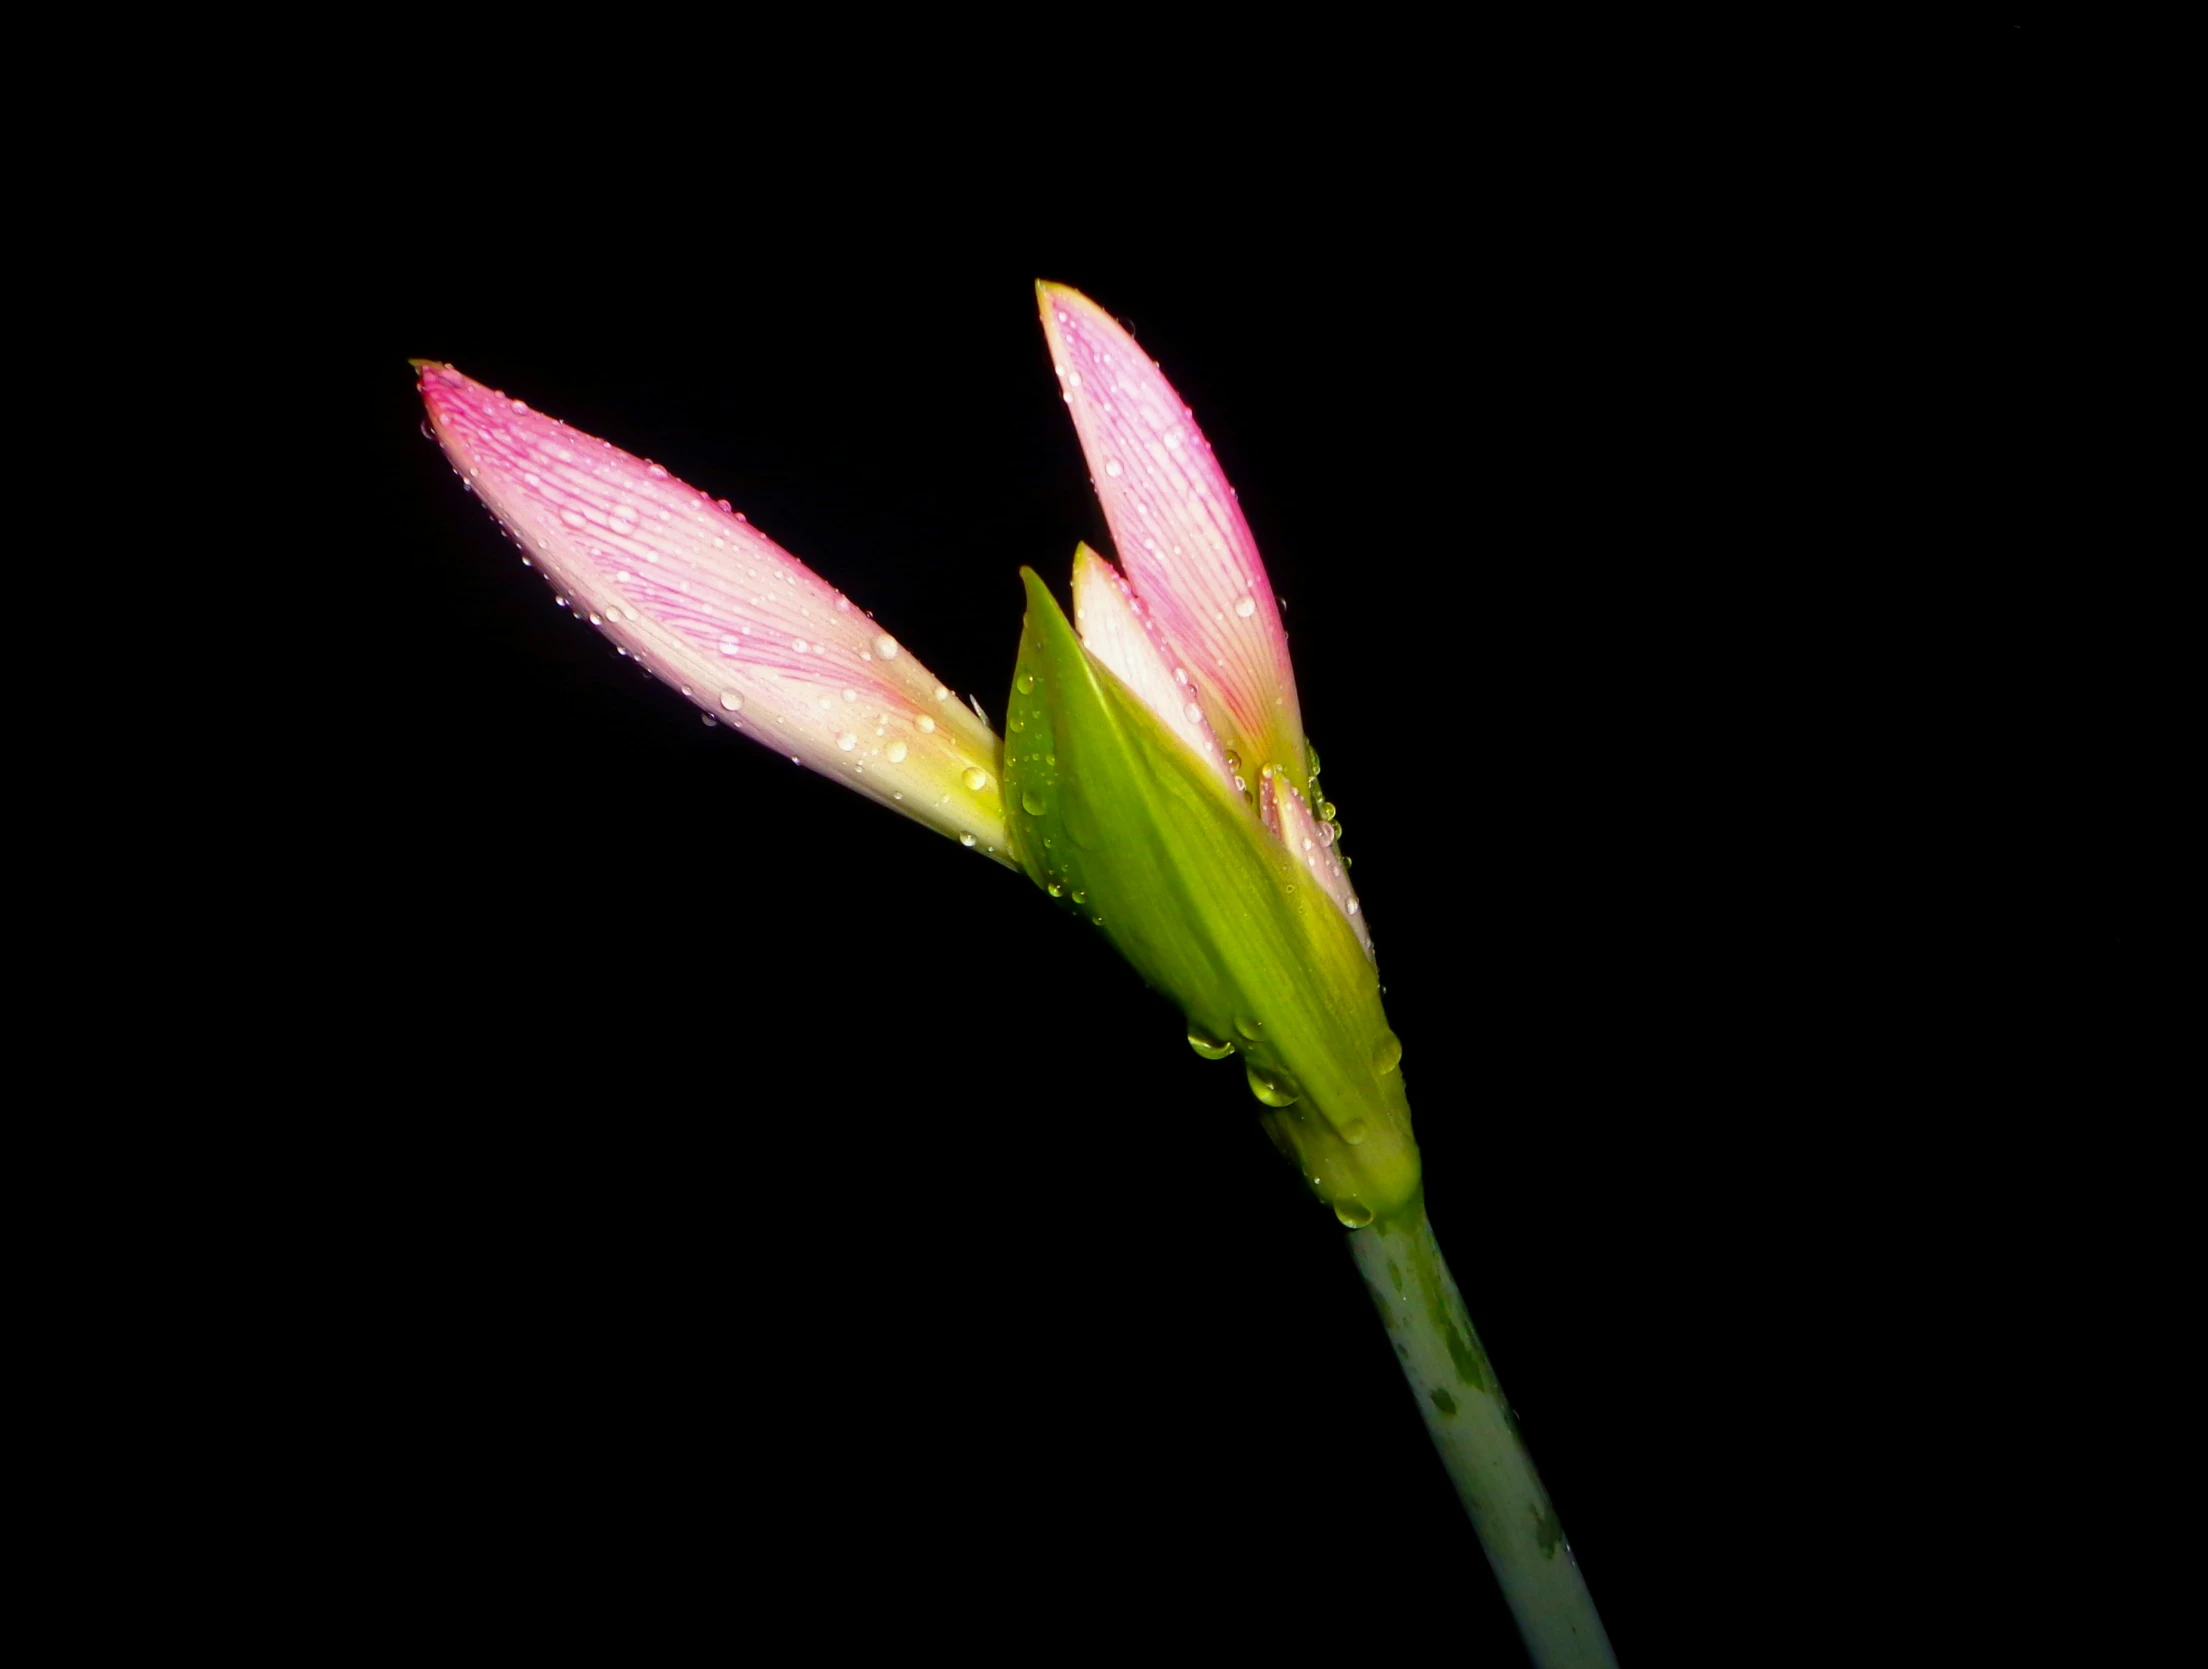 a close - up s of a pink flower bud